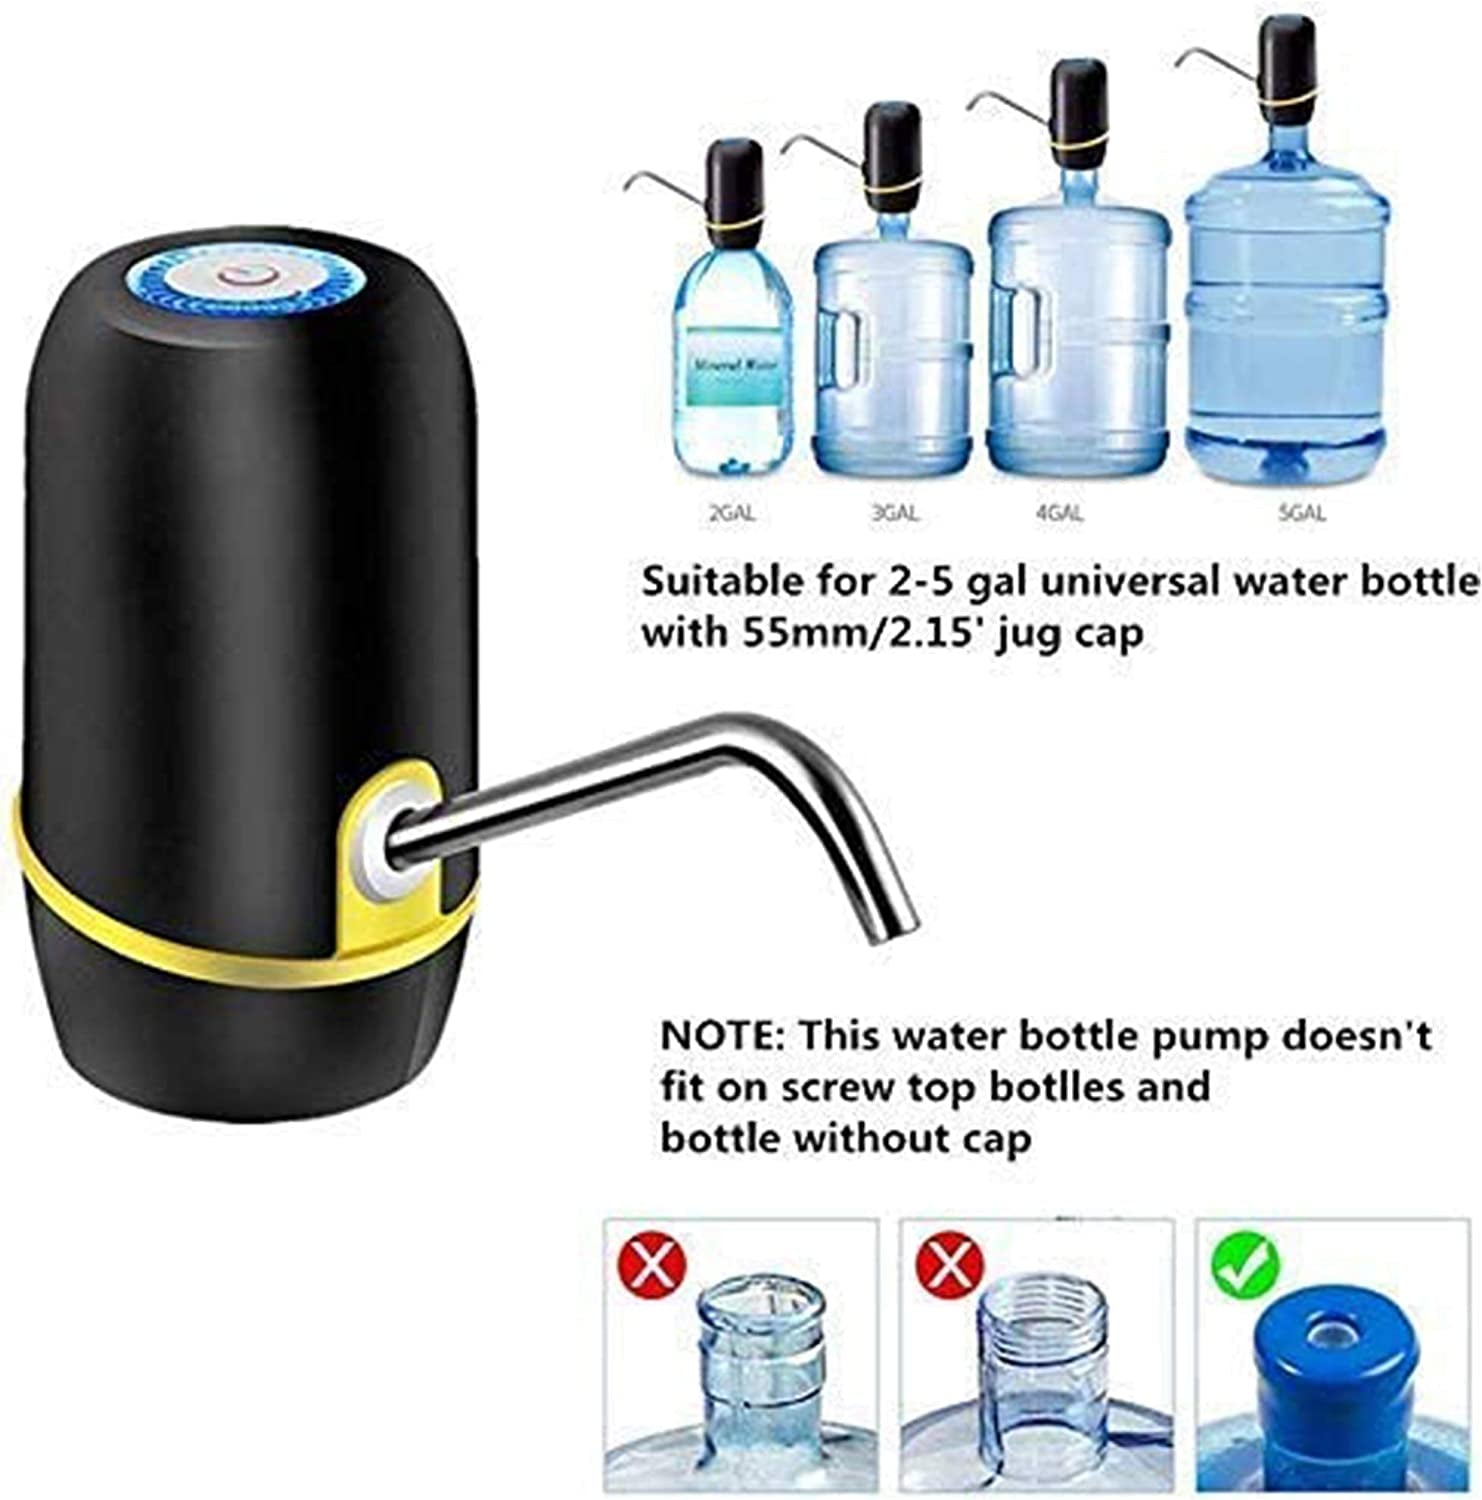 "HydroPump: Convenient Electric Water Jug Pump for Effortless, On-the-Go Drinking Water Dispensing from ３－5 Gallon Bottles – Ideal for Outdoor Adventures!"